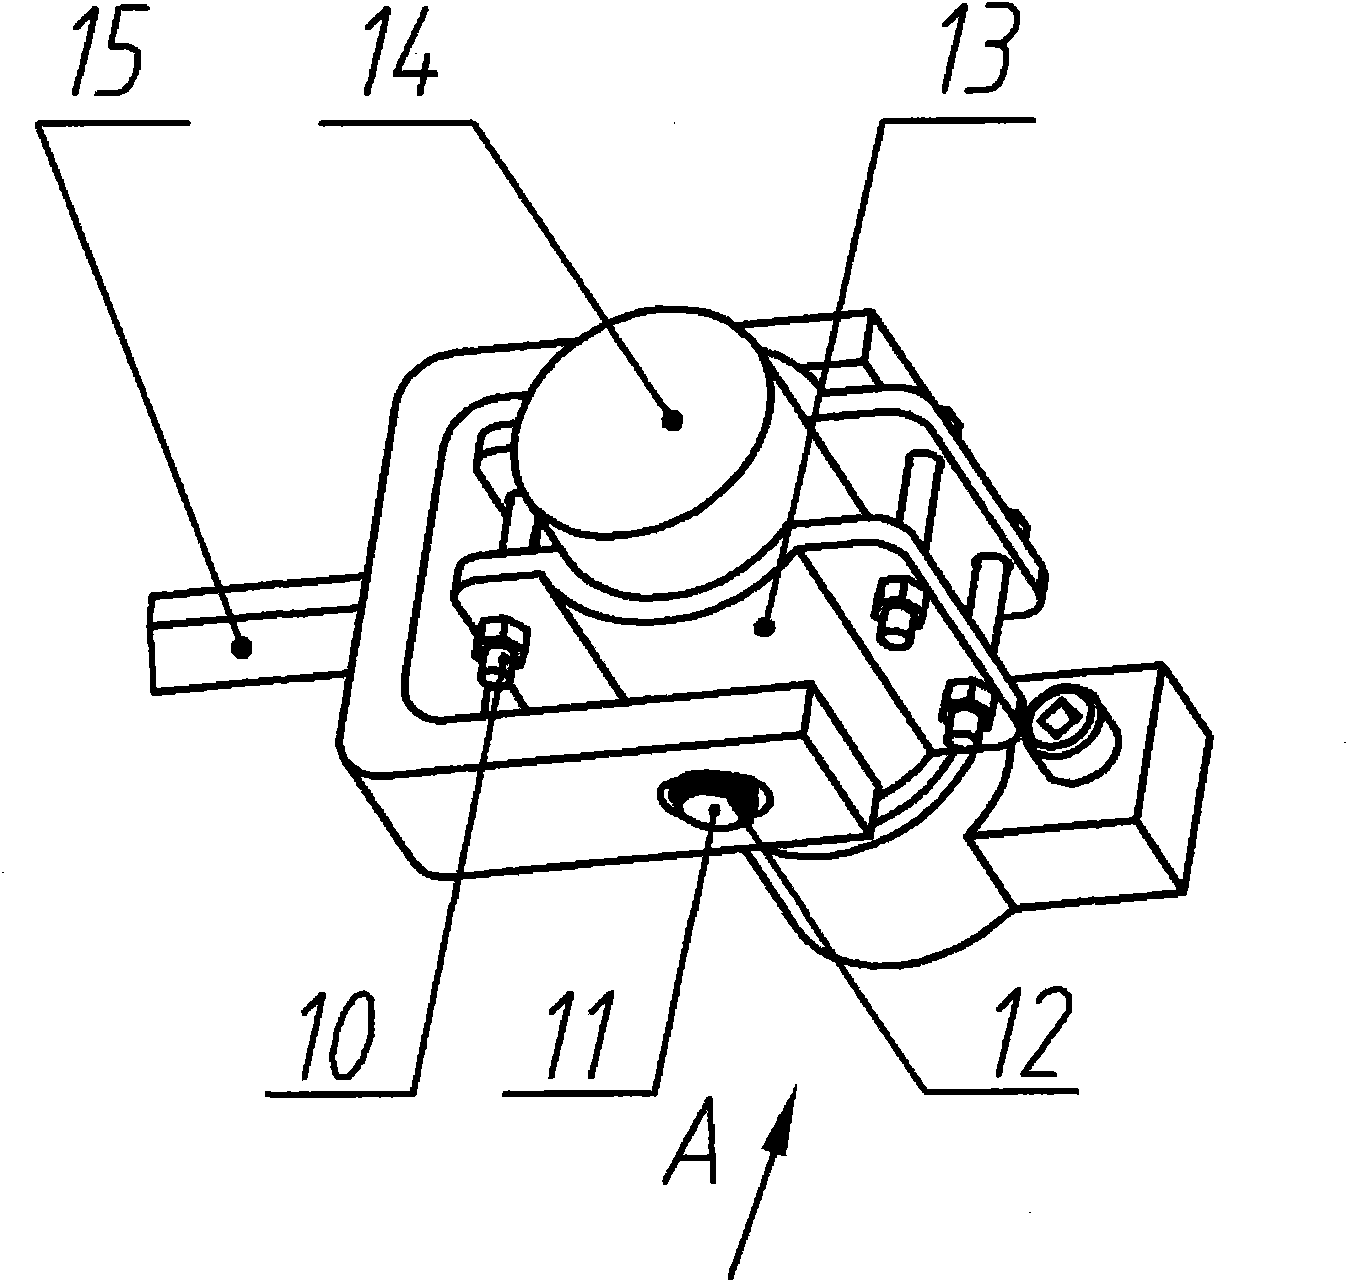 Auxiliary installation device for hydraulic bolt tensioning jack